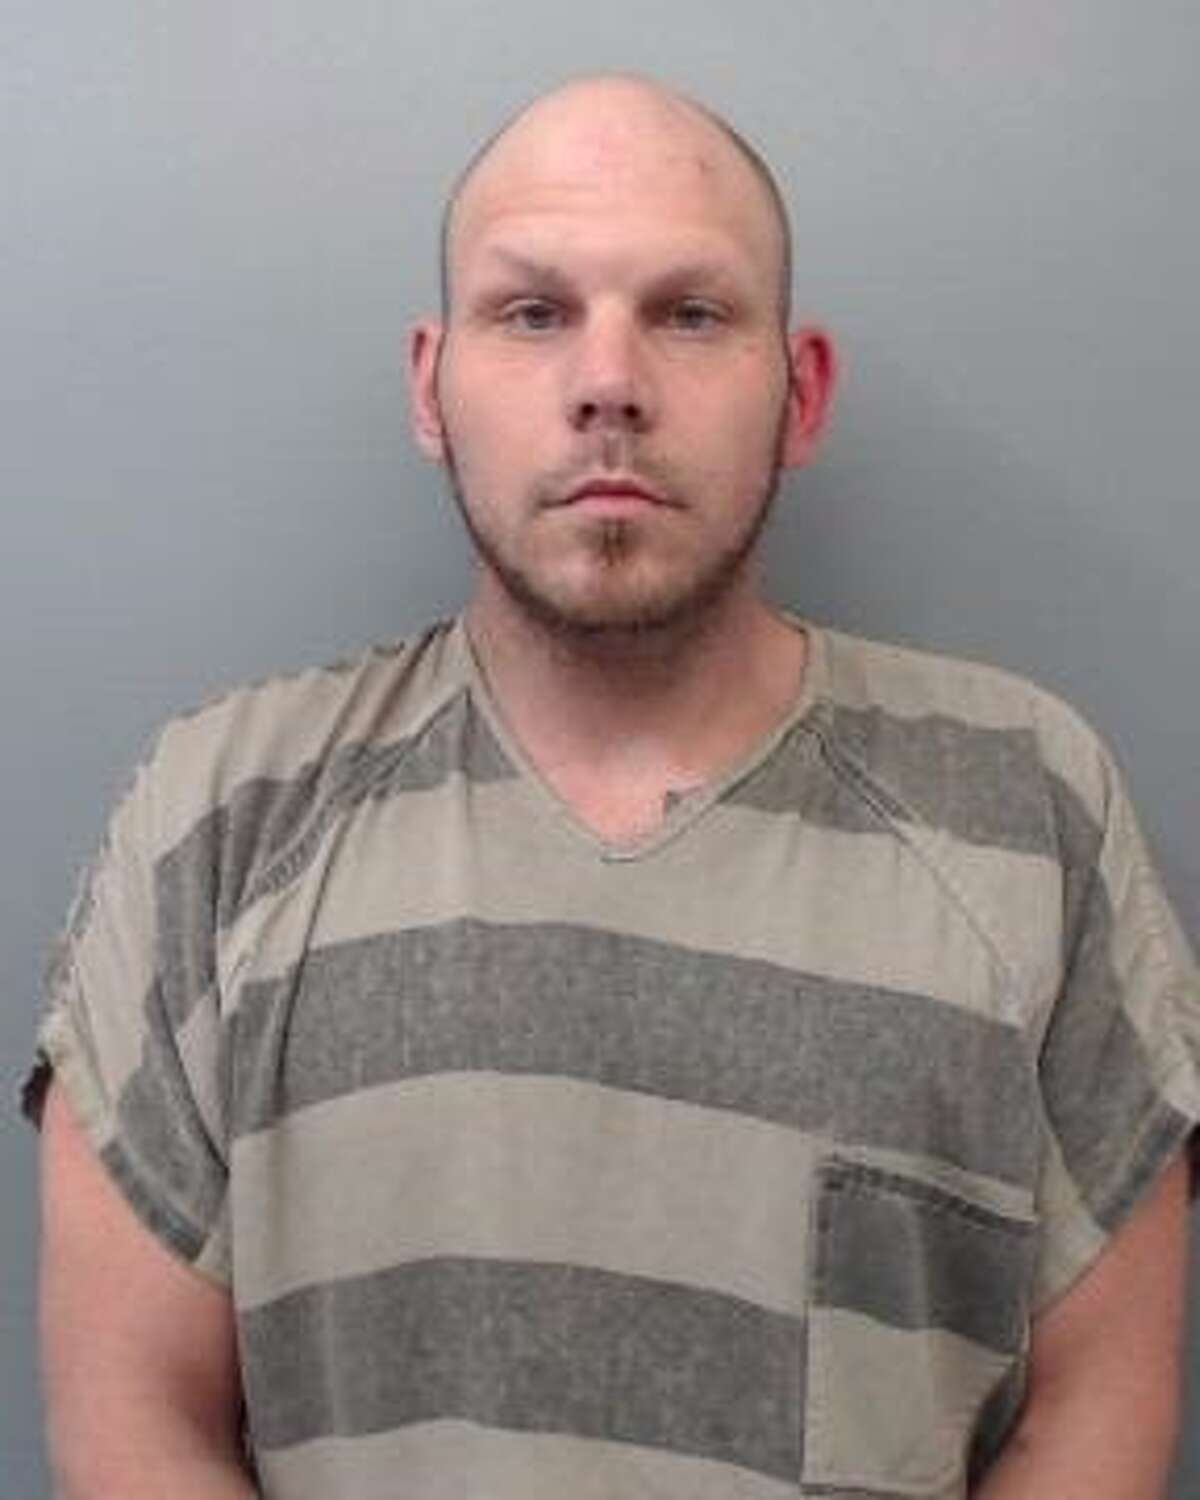 Tory K. Mote, 29, was charged with evading arrest with a motor vehicle, unauthorized use of motor vehicle, reckless driving, possession of controlled substance and manufacture, delivery of a controlled substance.